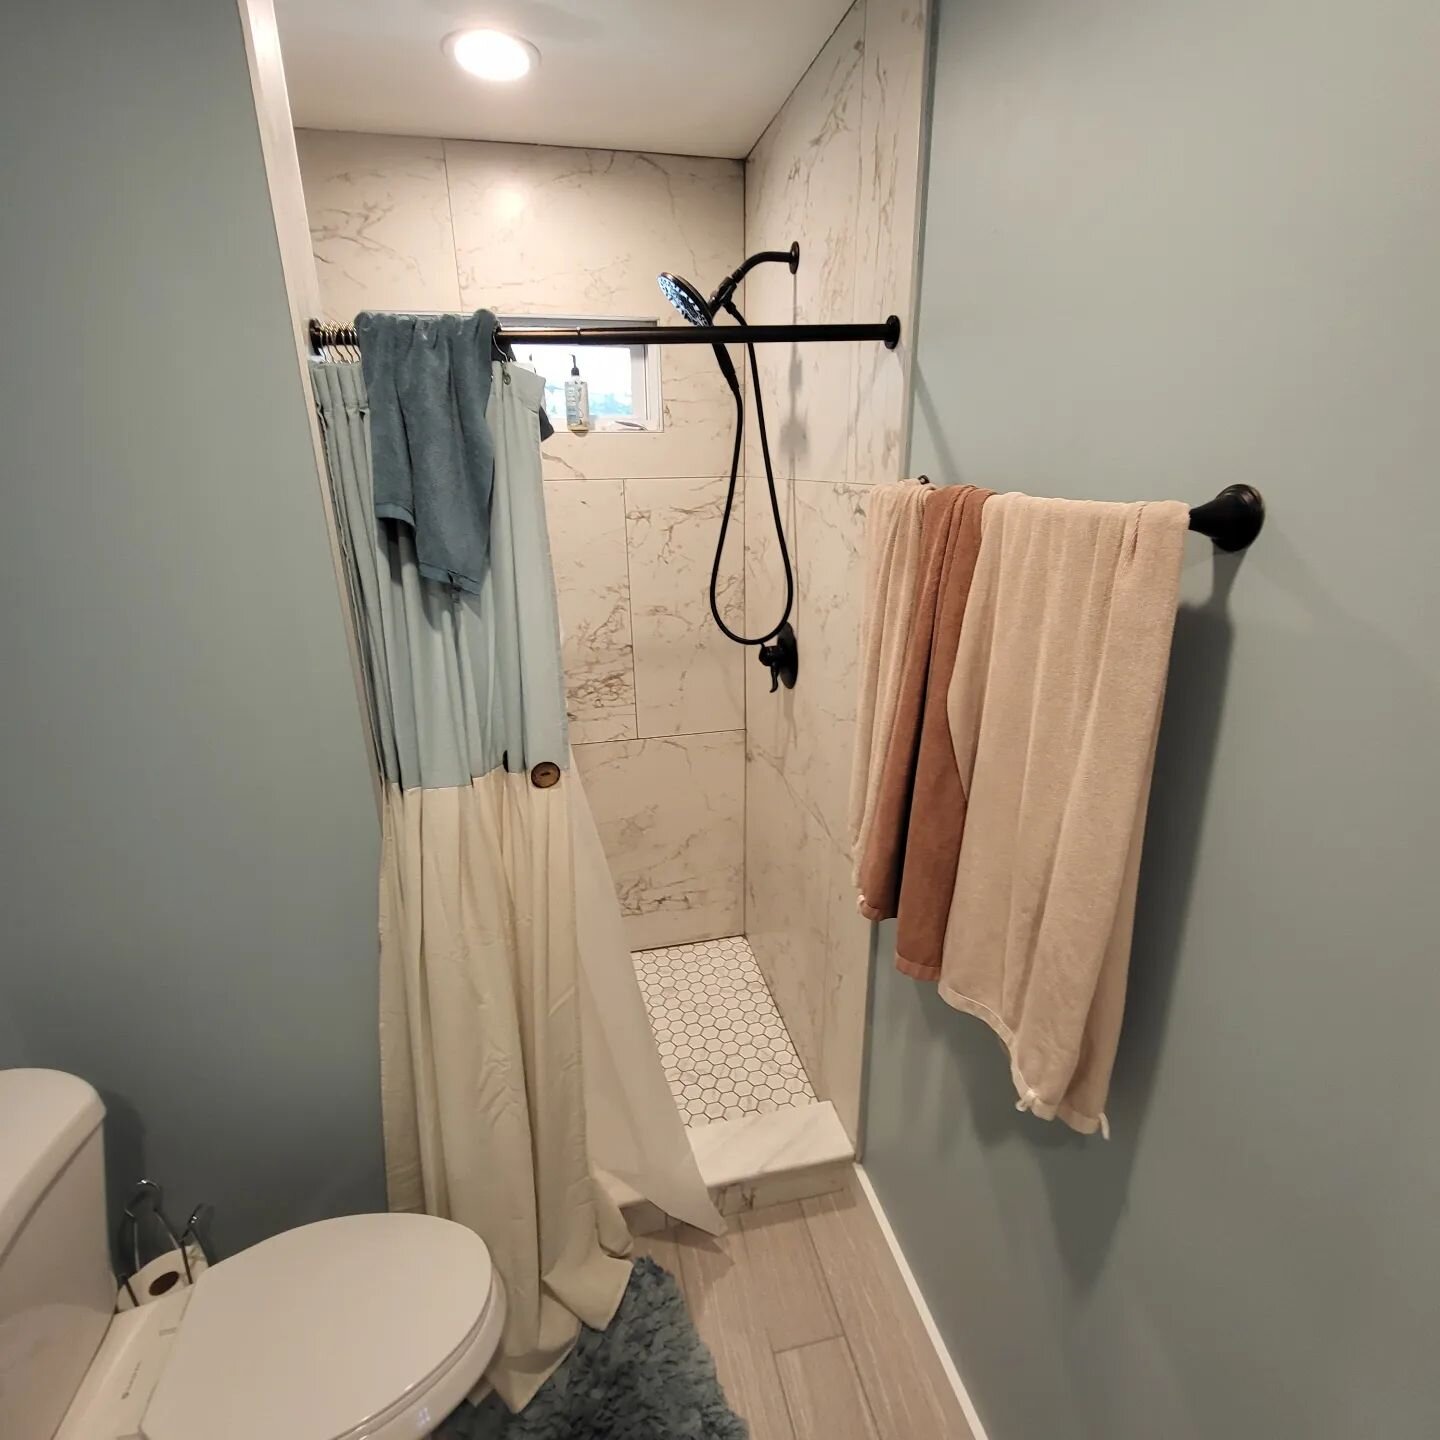 Wrapping this bathroom up today. Just a few punch list items to take care of like raising the lighting next to the mirror and some touch ups. 

We built this bathroom from extra living room space our customers wanted to be made into a more useful are